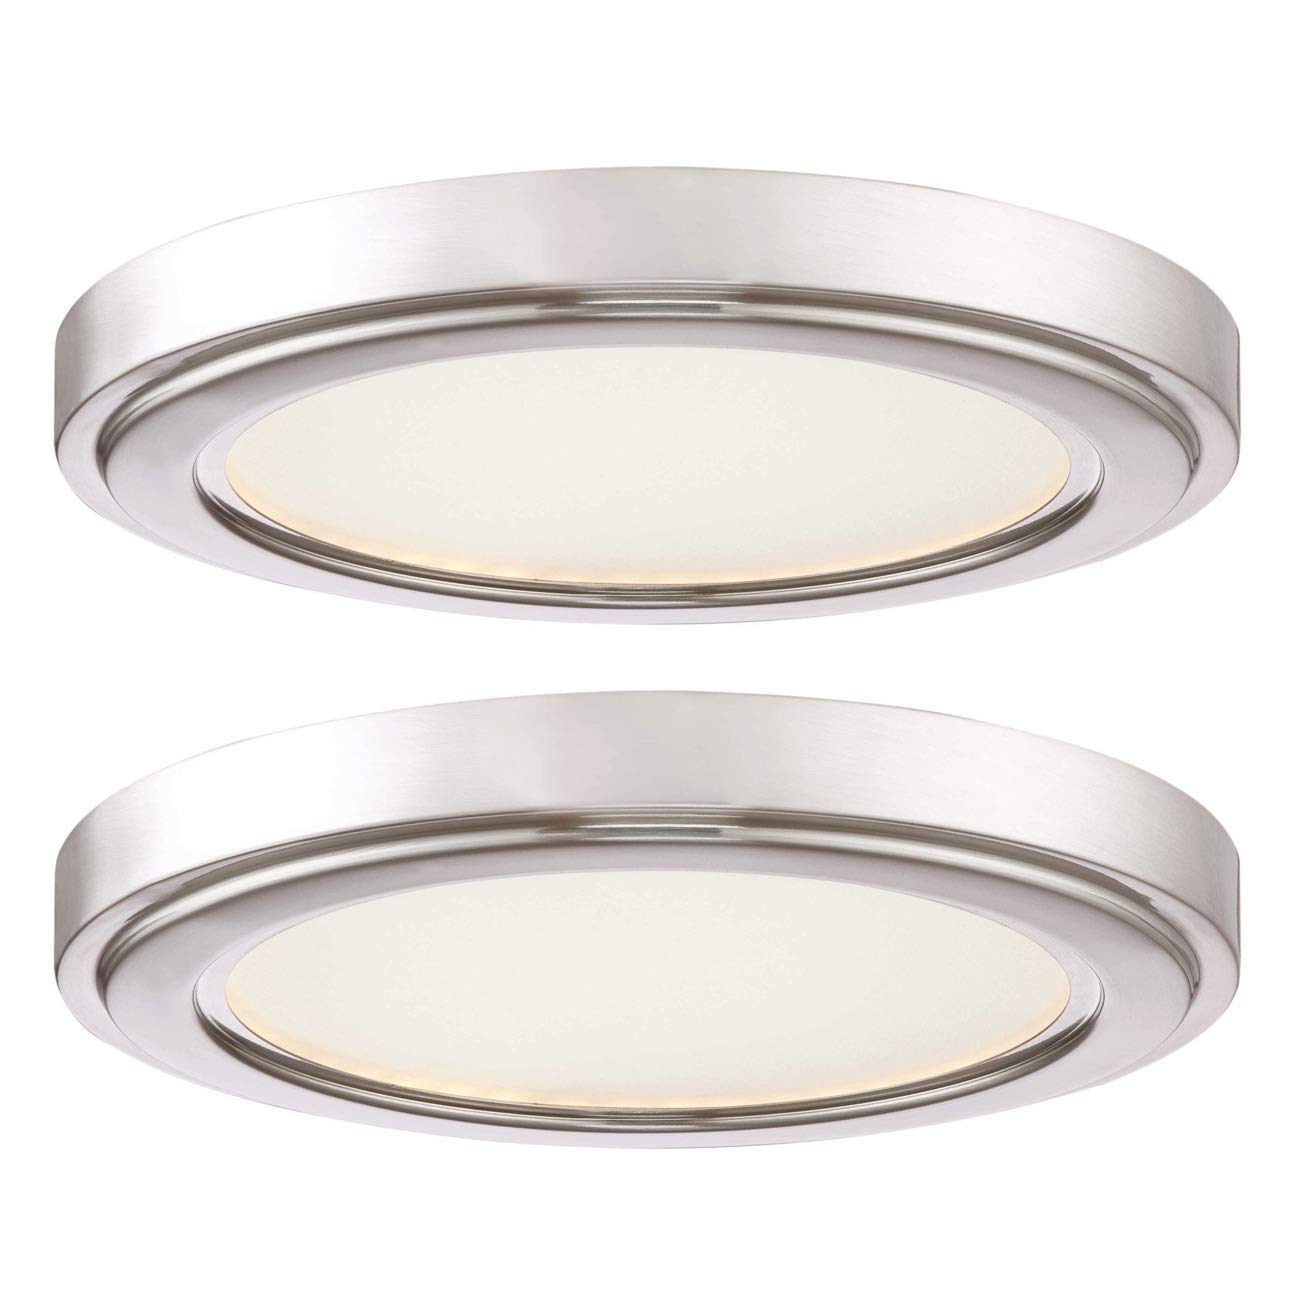 GRUENLICH LED Flush Mount Ceiling Light Fixture, 9 Inch Slim Edge Light, Dimmable 10.5W 620 Lumen, Metal Housing with Nickel Finish, ETL Rated, 2-Pack